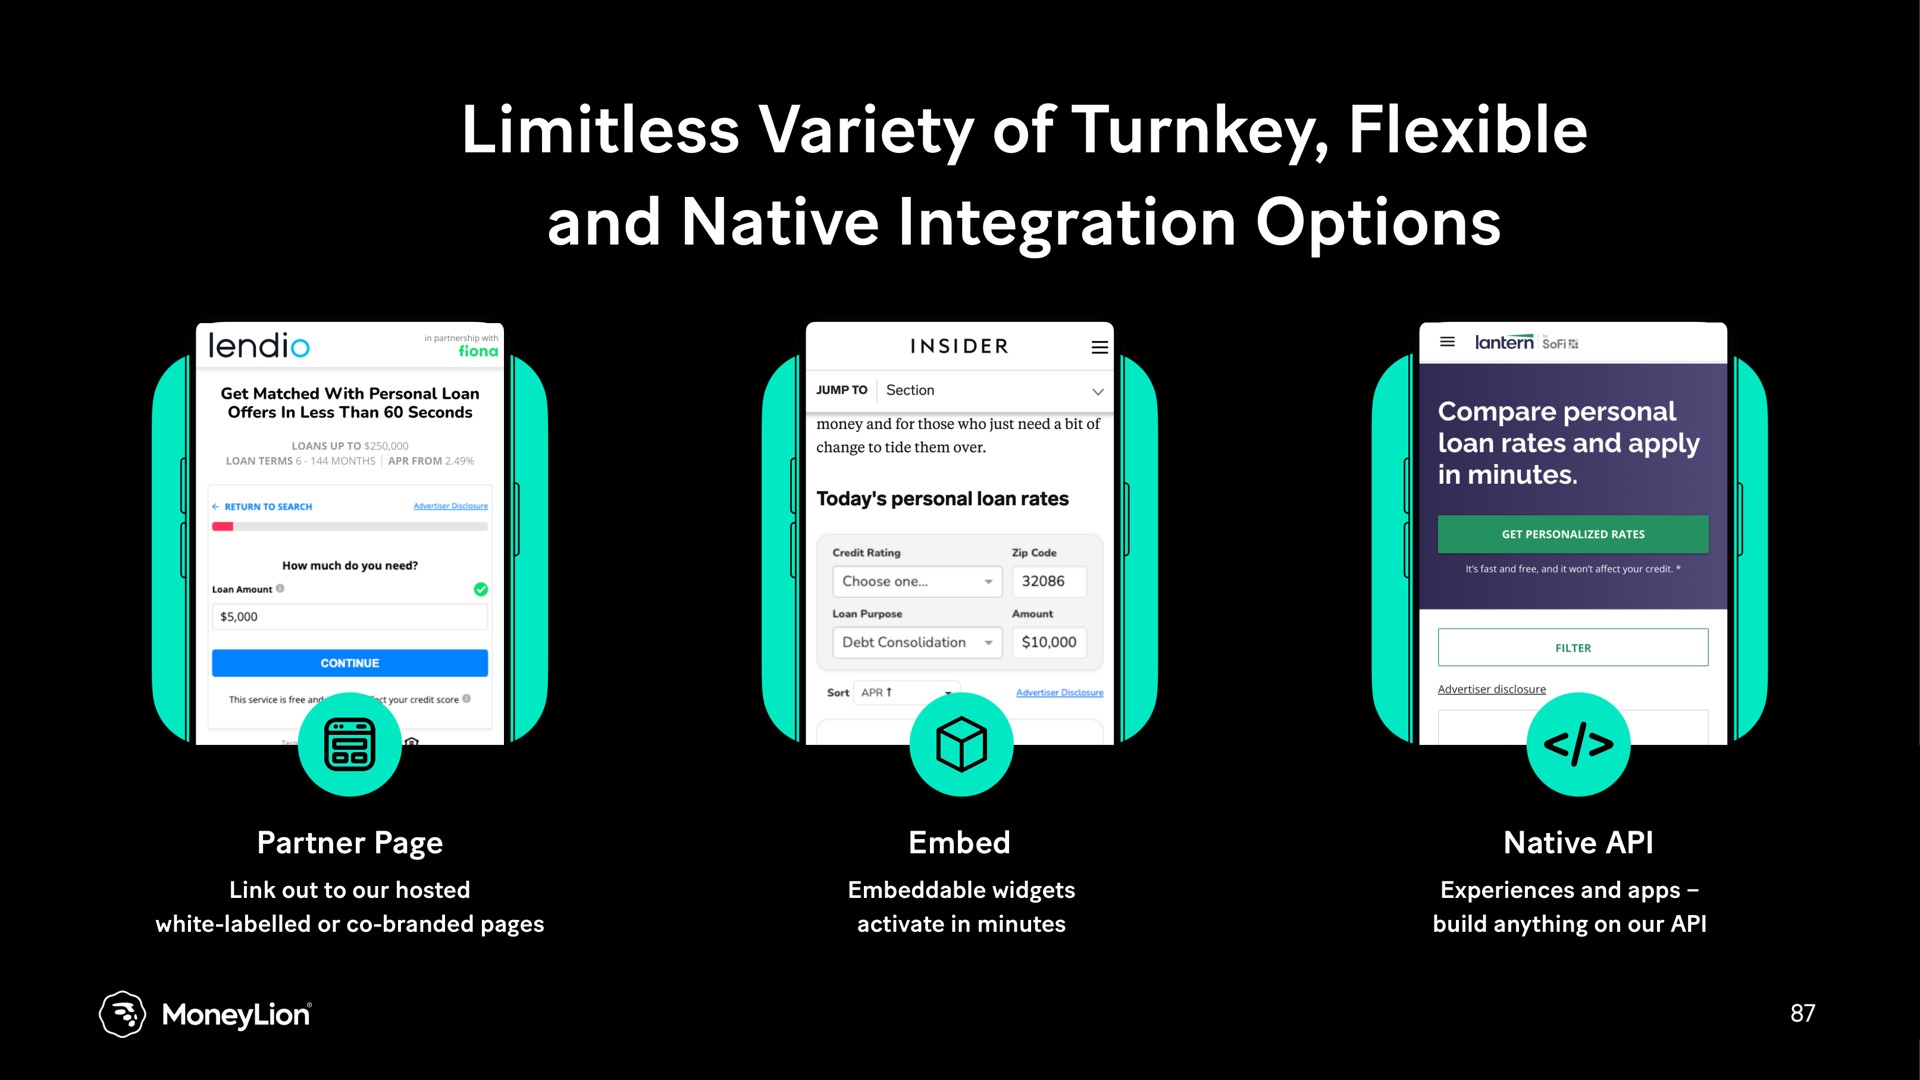 limitless variety of turnkey flexible and native integration options | MoneyLion